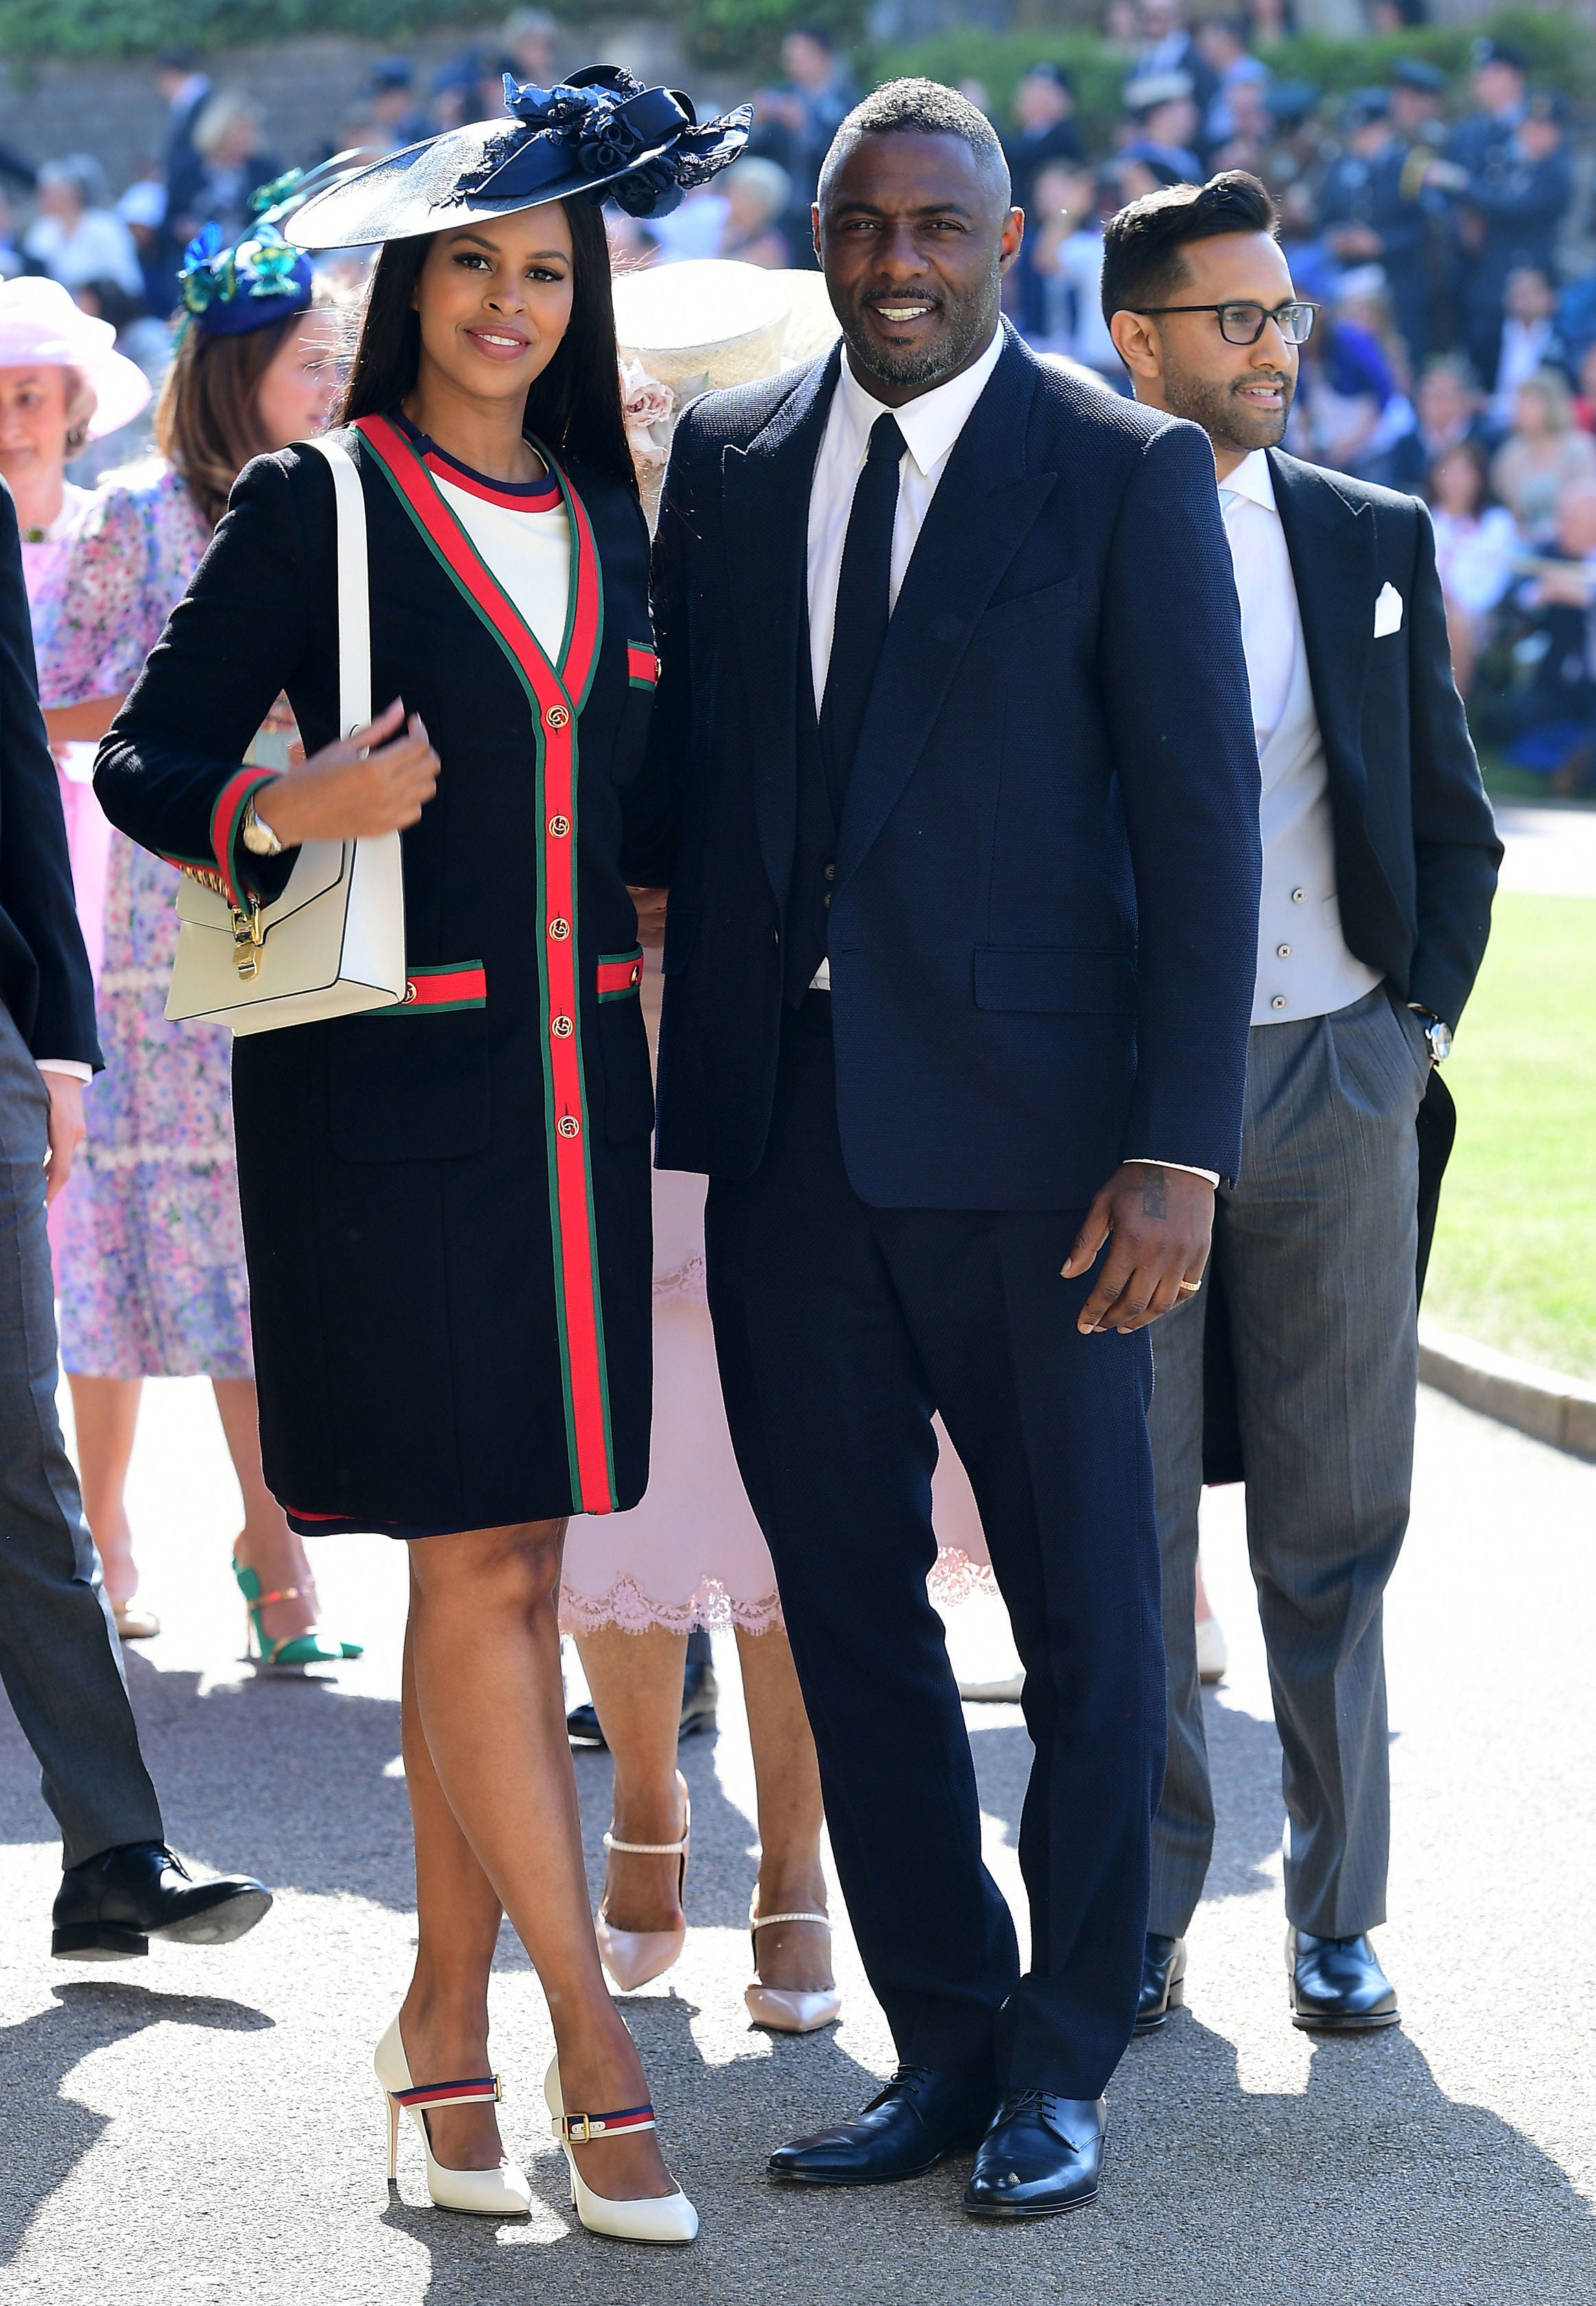 The Royal Wedding Celebrity Guest List Was Filled With Black Excellence 
